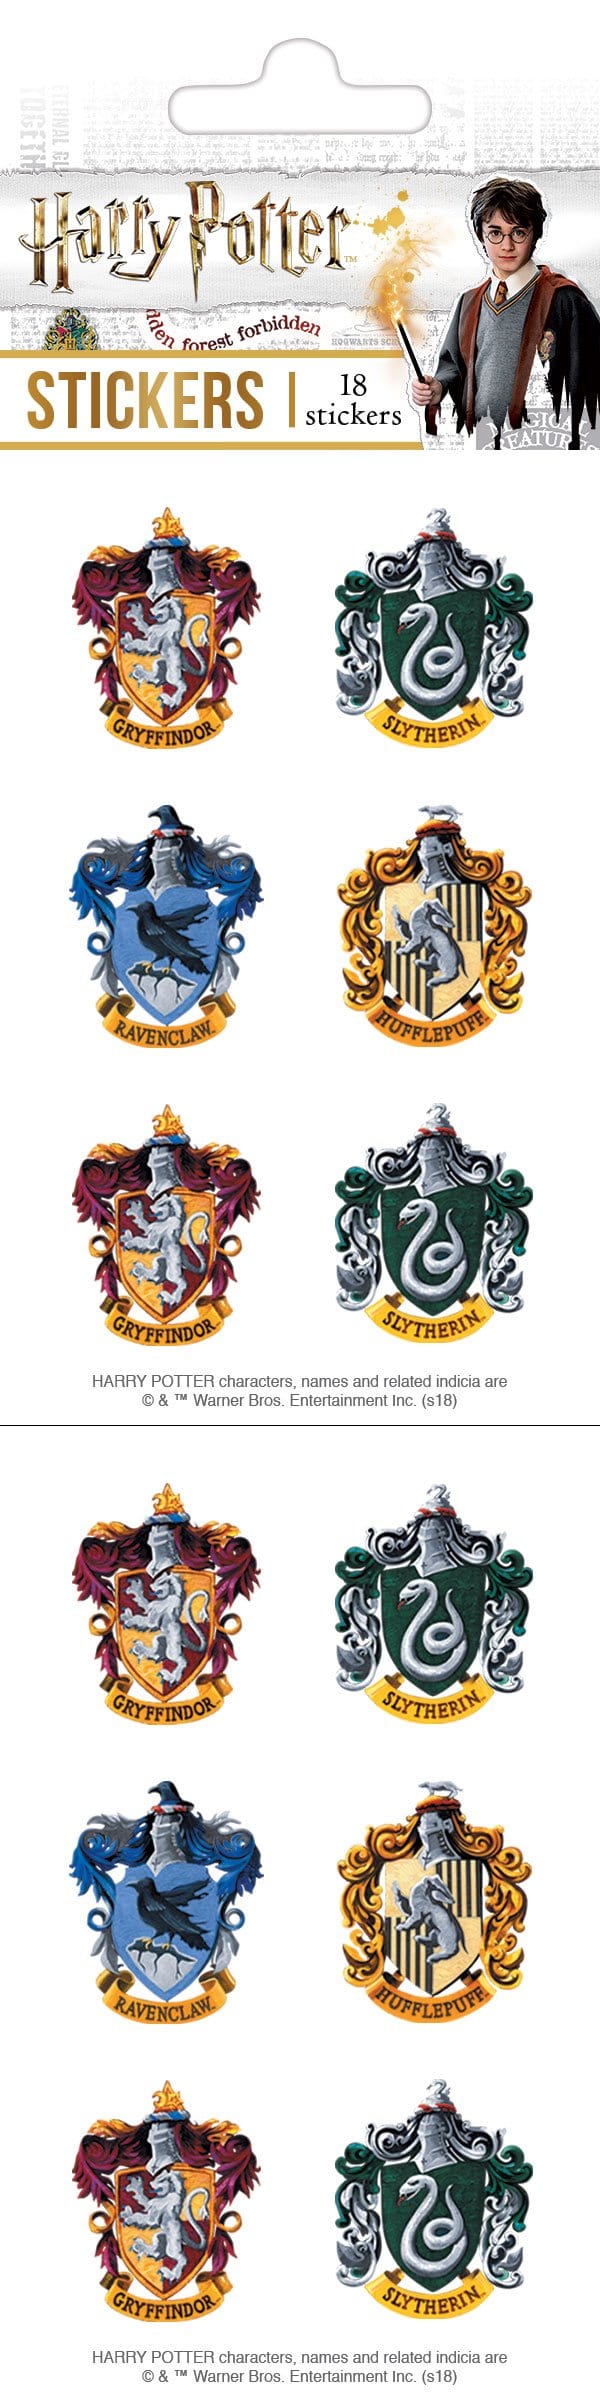 stickers shown in packaging featuring the Harry Potter crests.